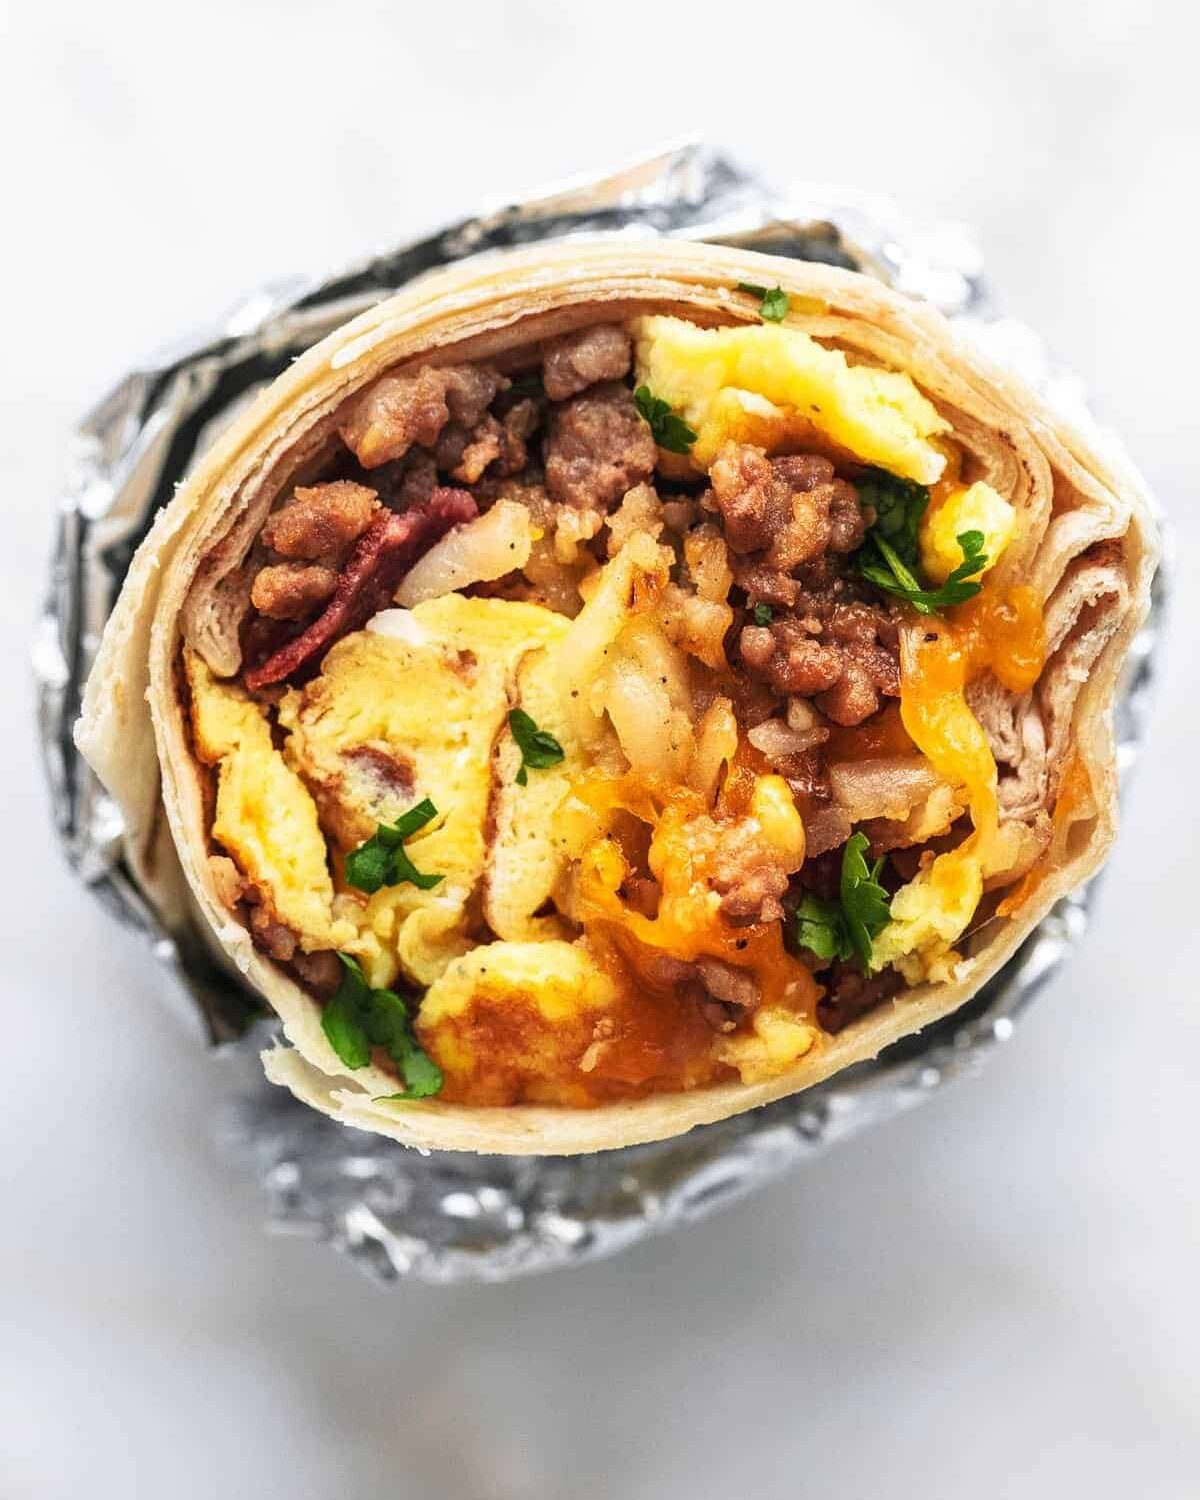 A foil-wrapped breakfast burrito filled with eggs, sausage, beans, and cheese.